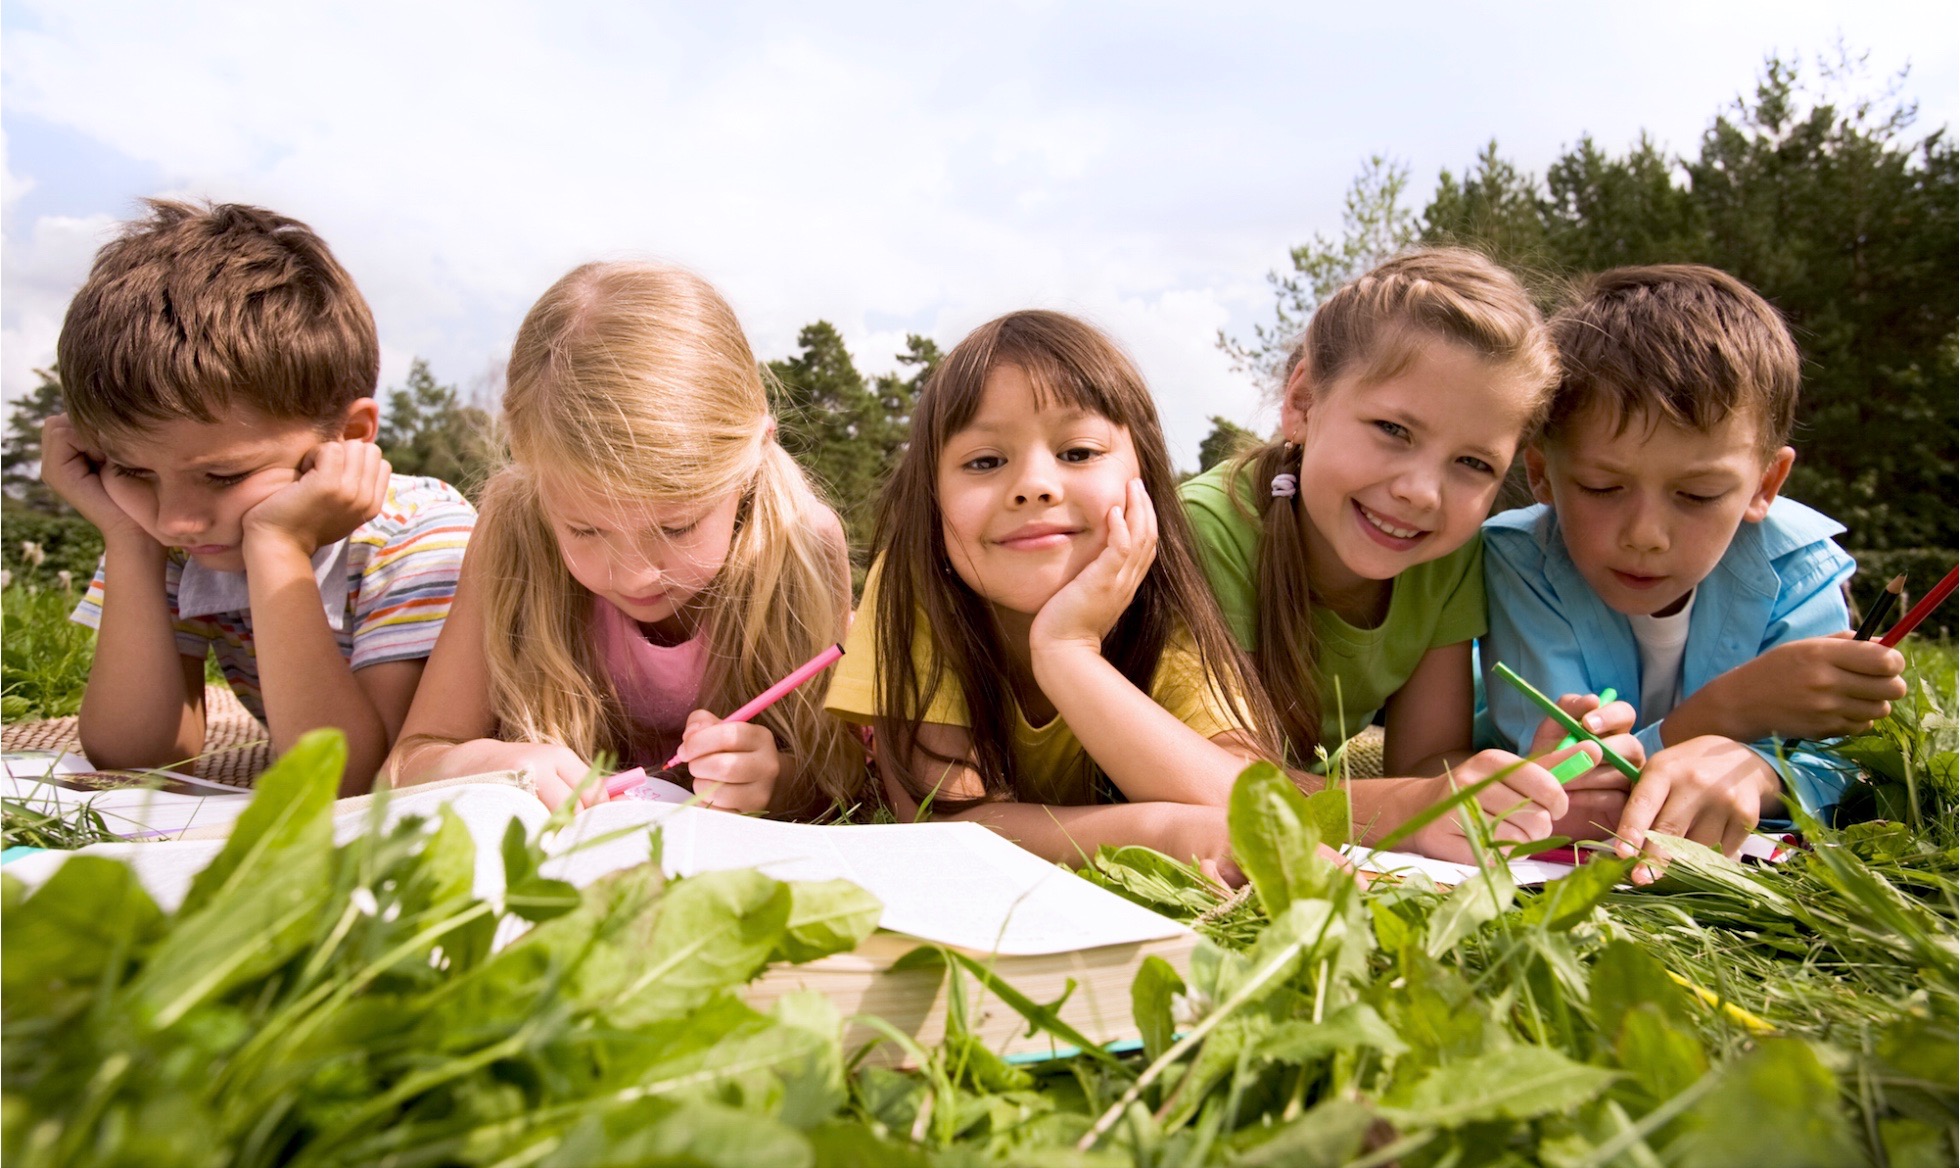 Looking for Outdoor Educational Learning Resources?